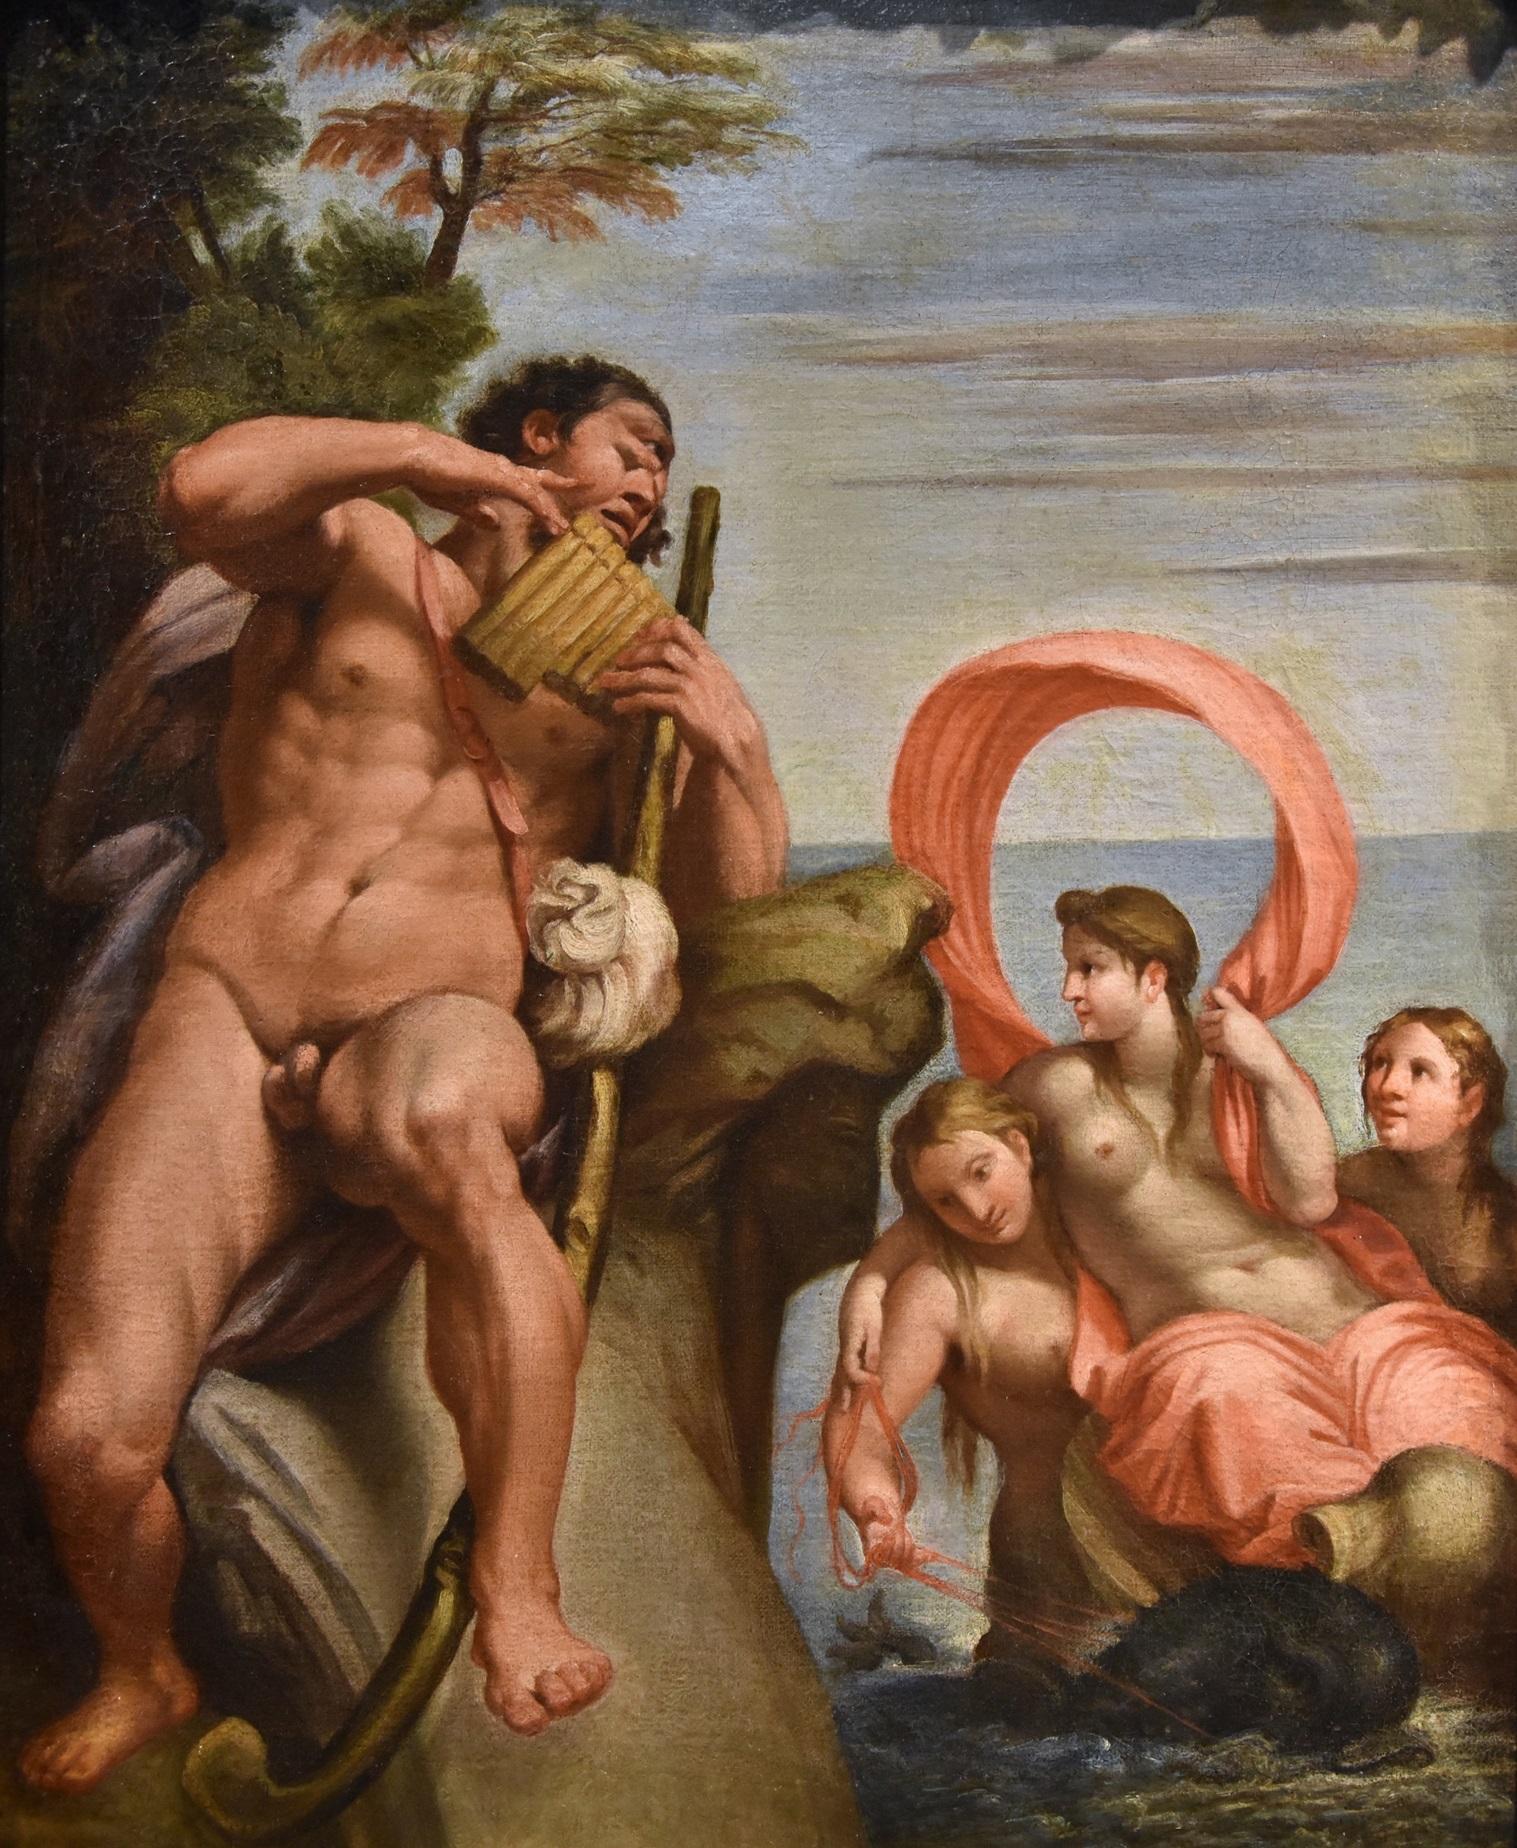 Annibale Carracci (bologna, 1560 - Rome, 1609) Portrait Painting - Polyphemus Galatea Carracci Paint 17th Century Oil on canvas Old master Italy